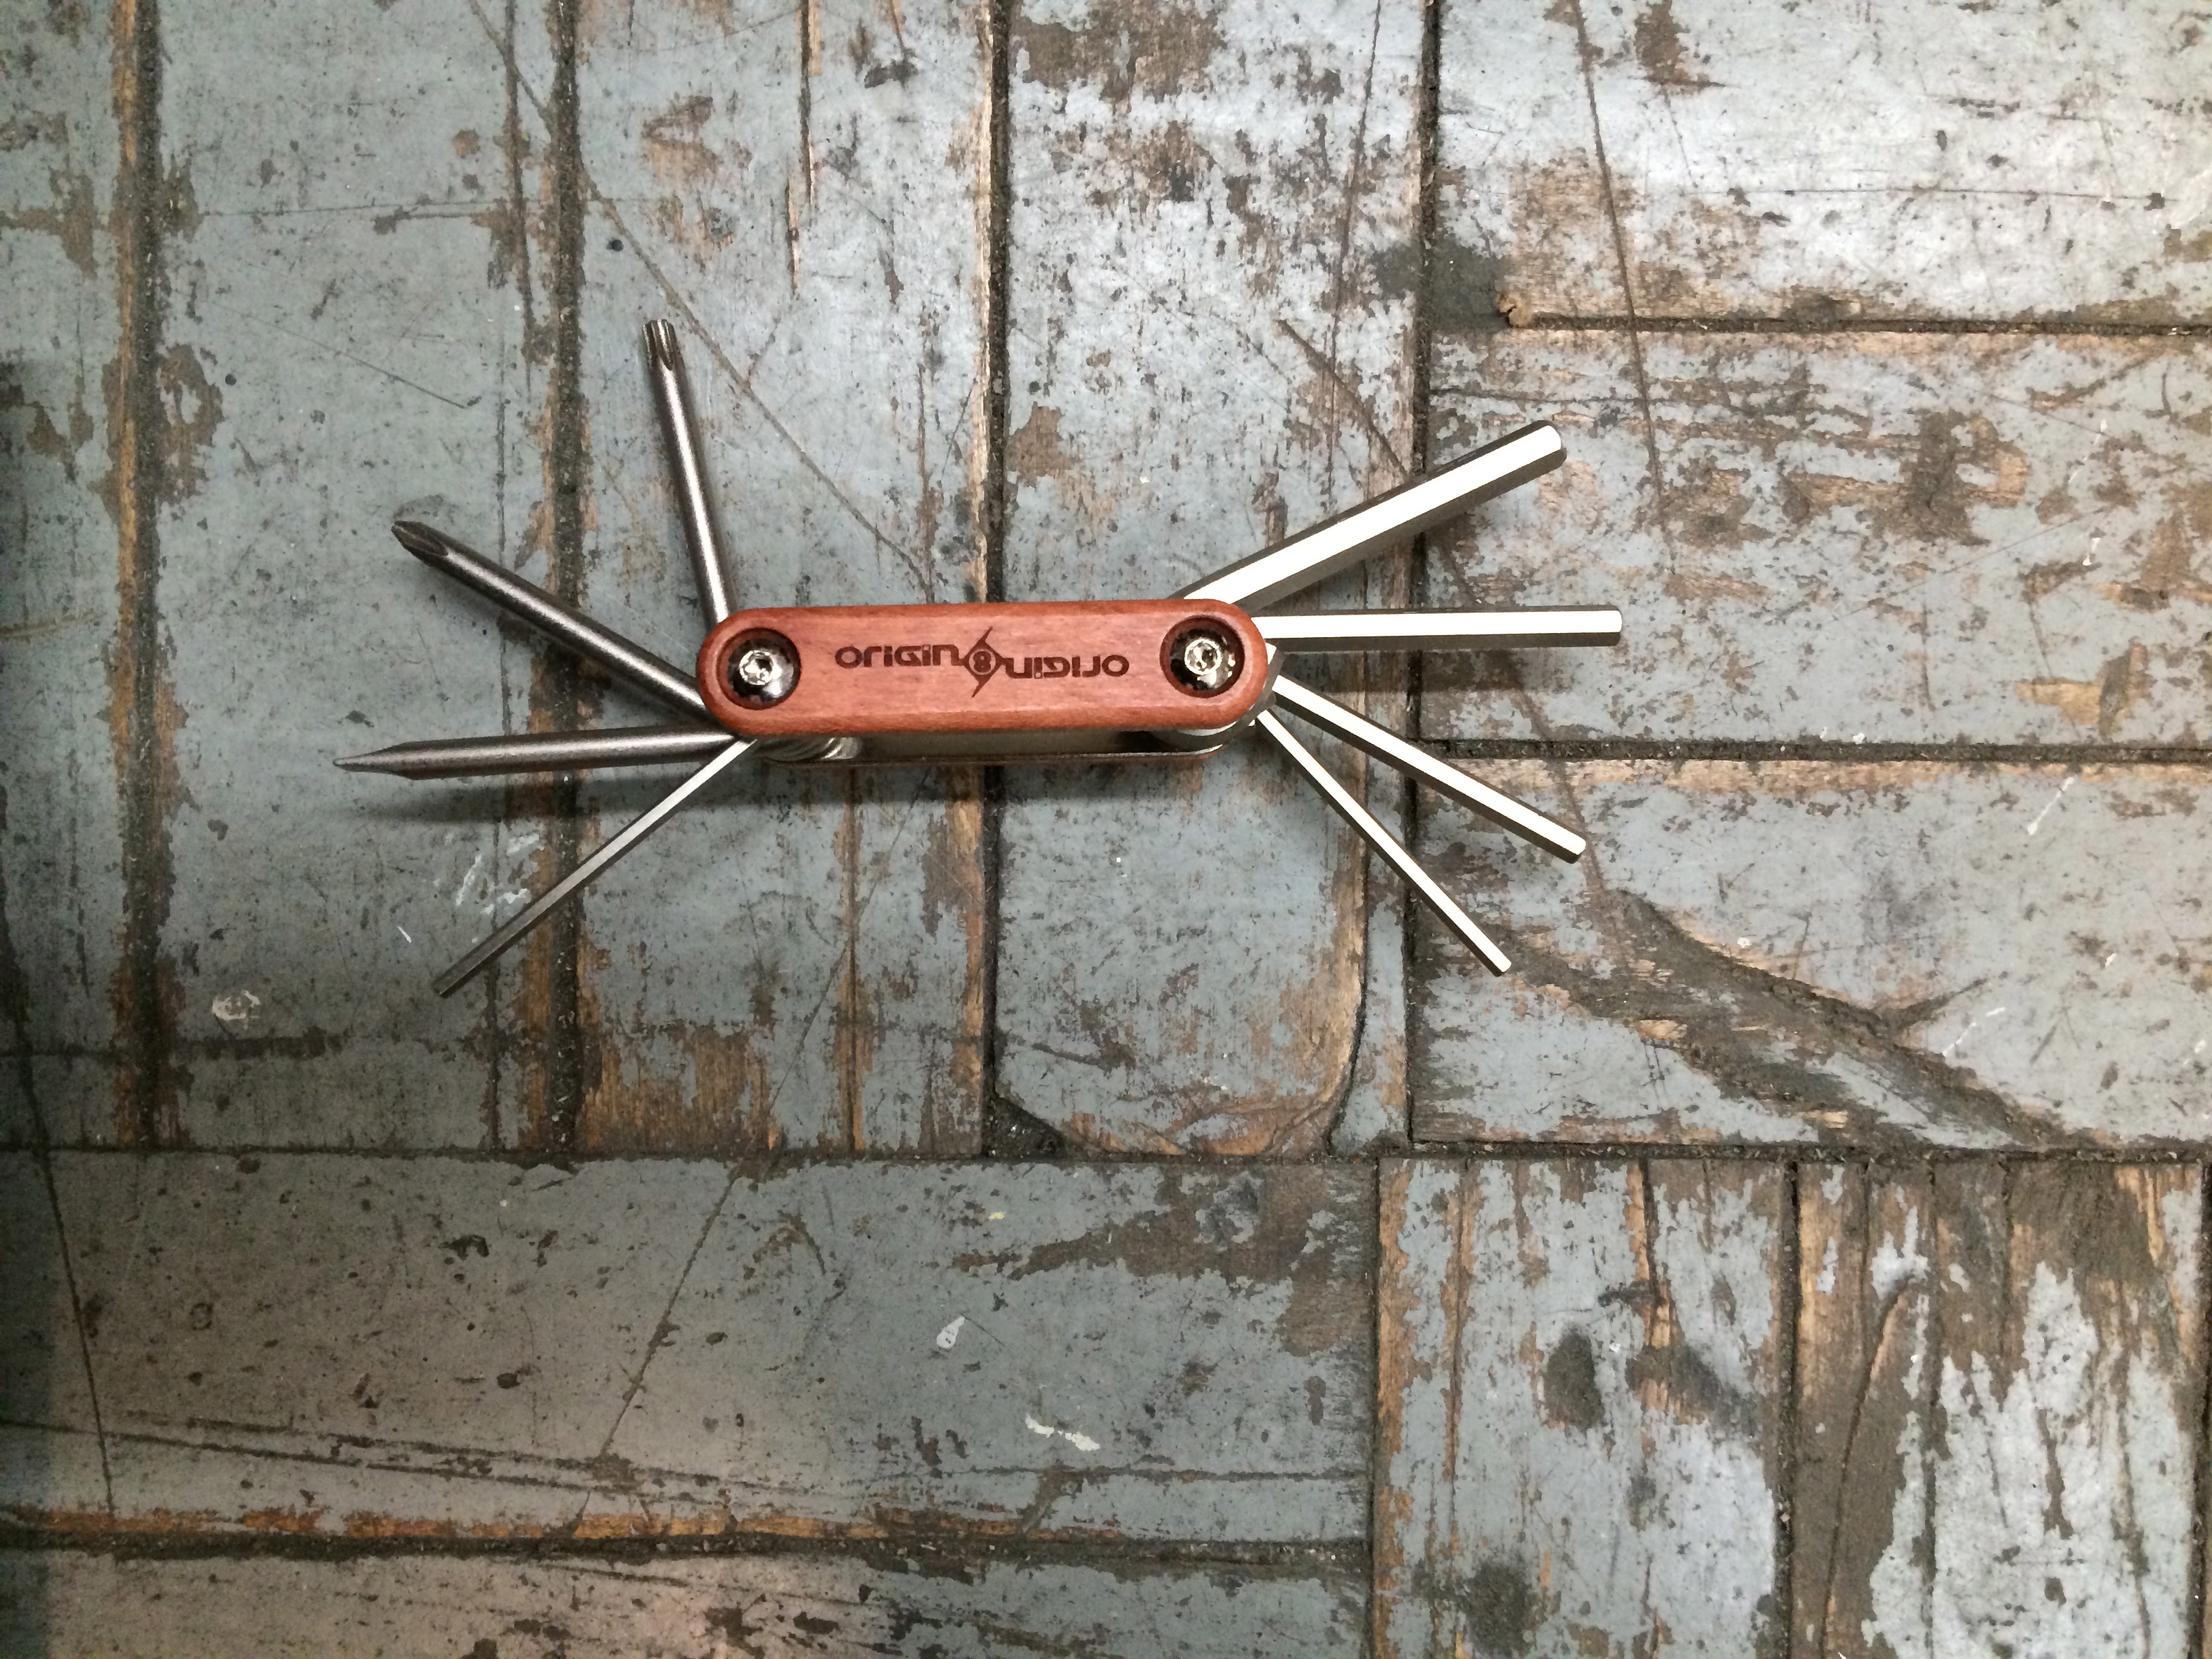 Multi-tool - I once owned a Swiss Army knife in college but only used the bottle opener...